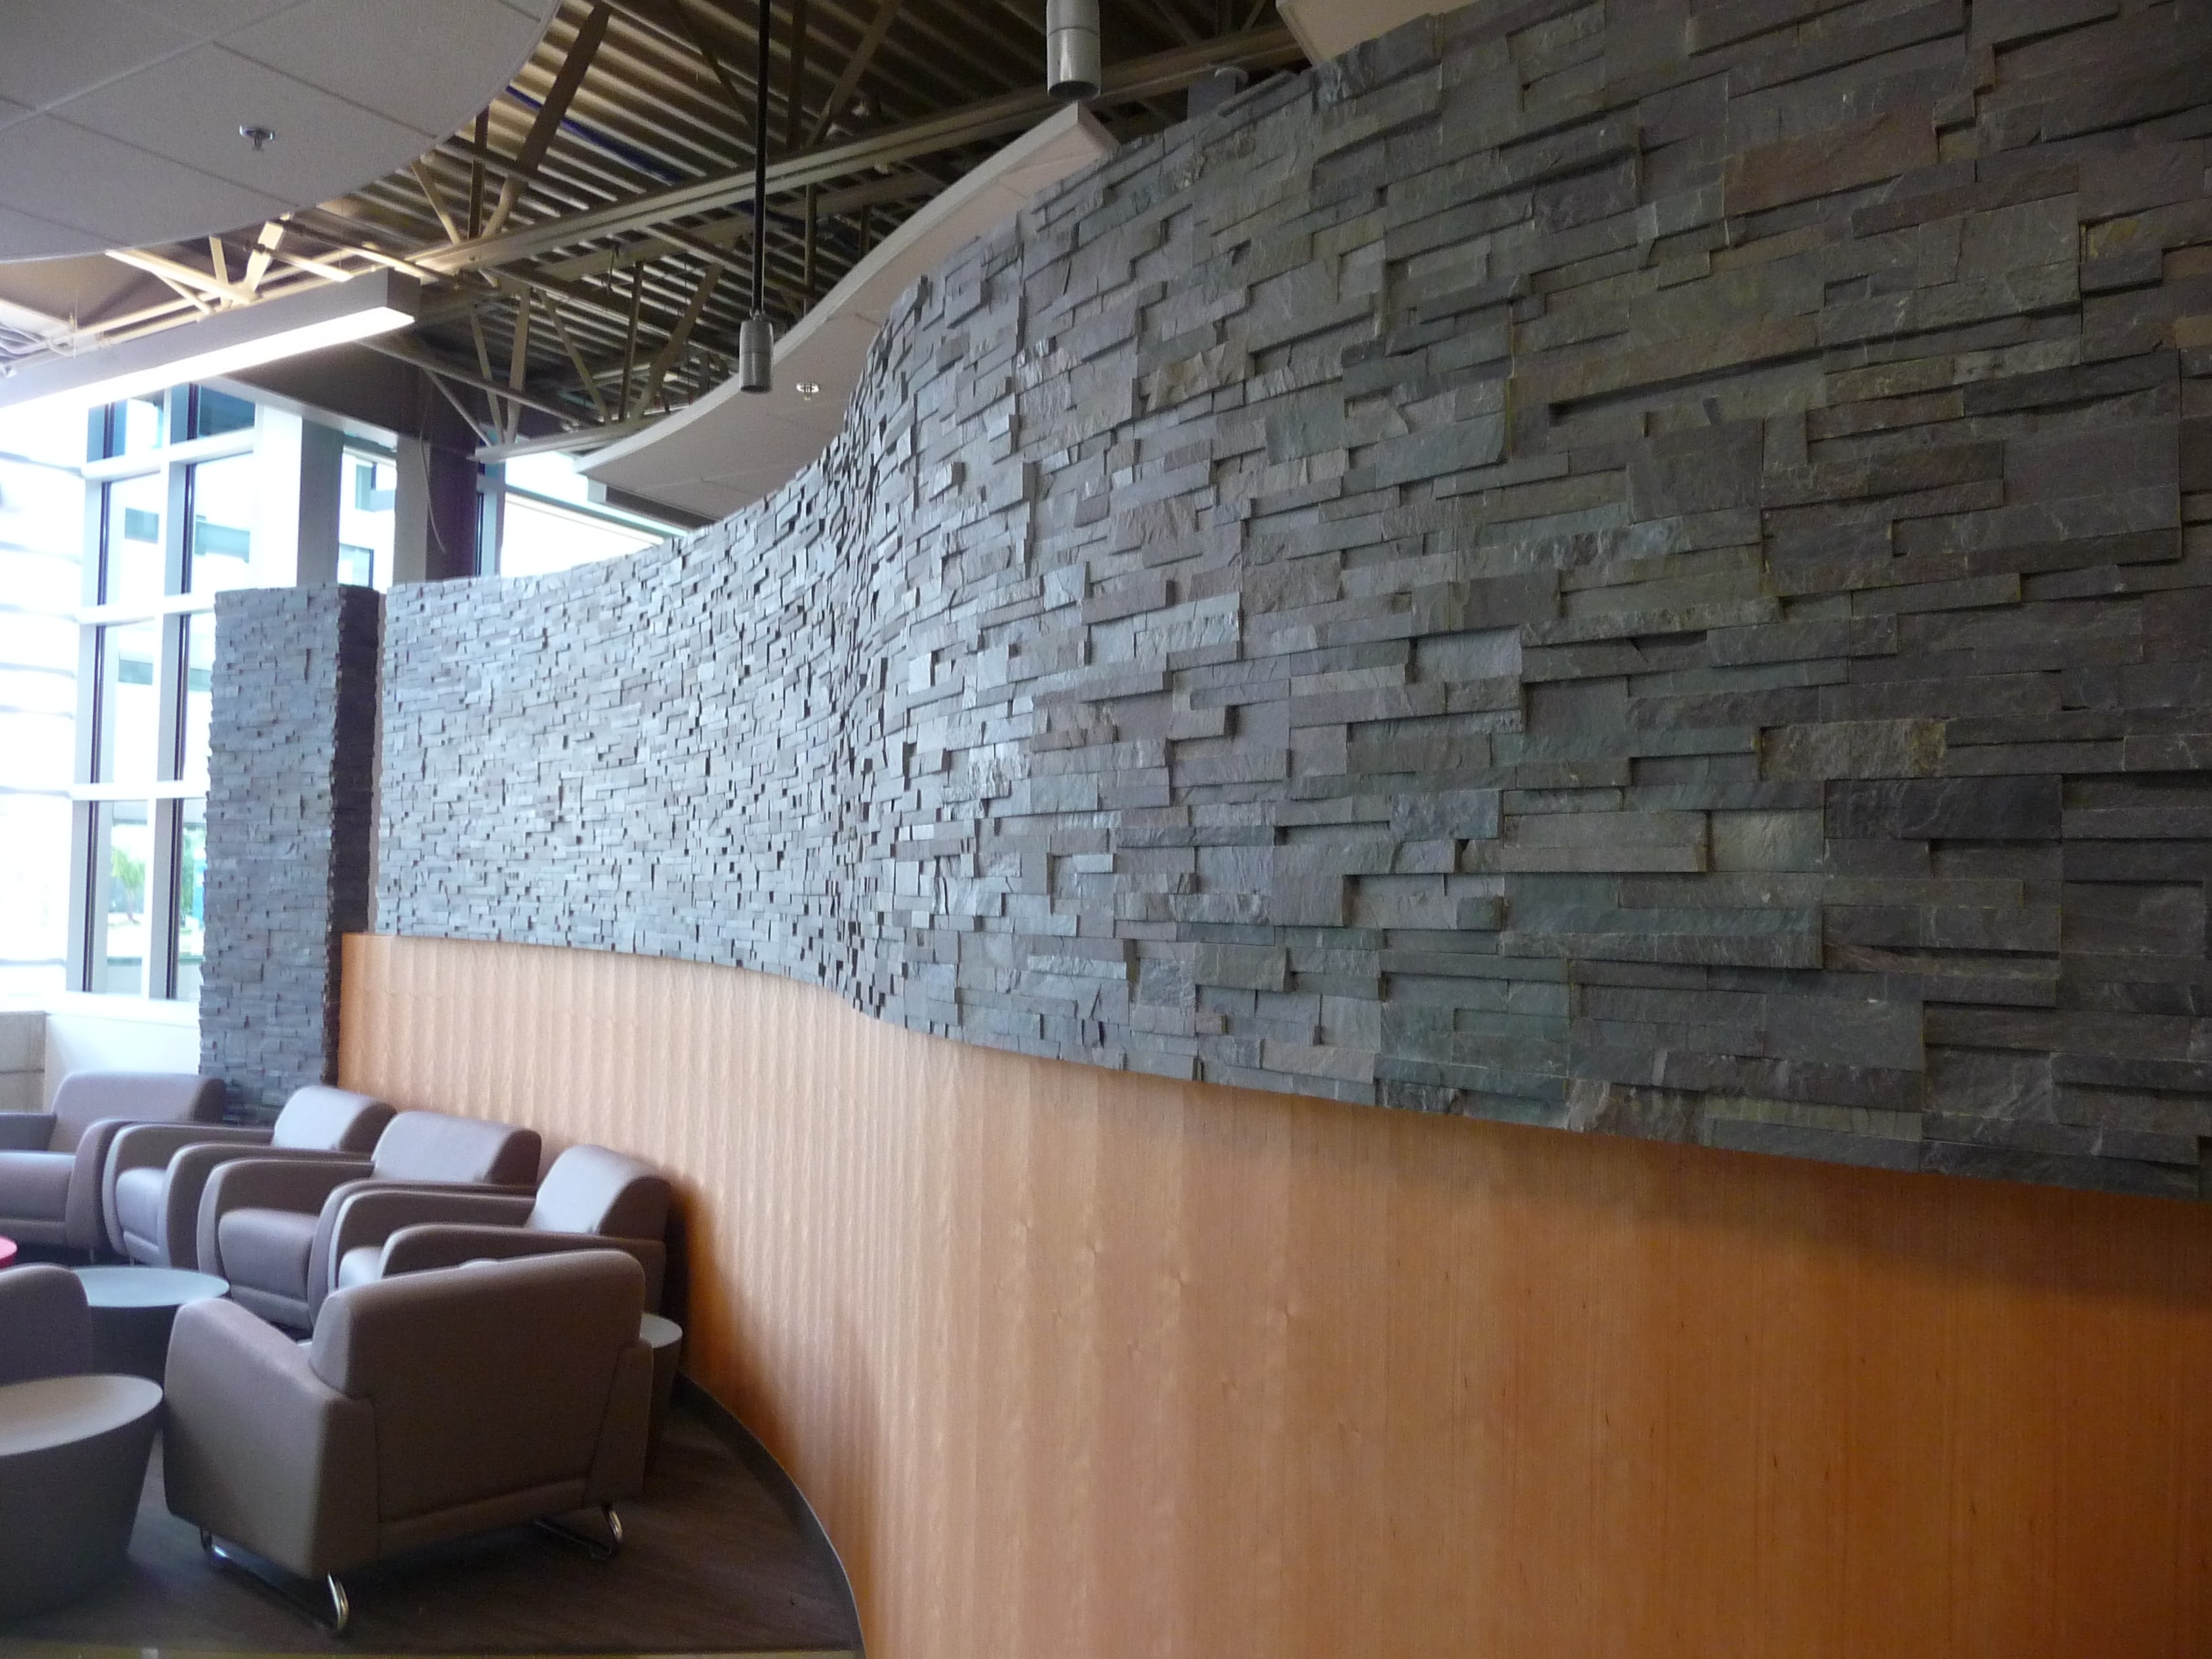 How To Install Rock Ridge Ledger Stone How to installed stacked stone panels on curved walls